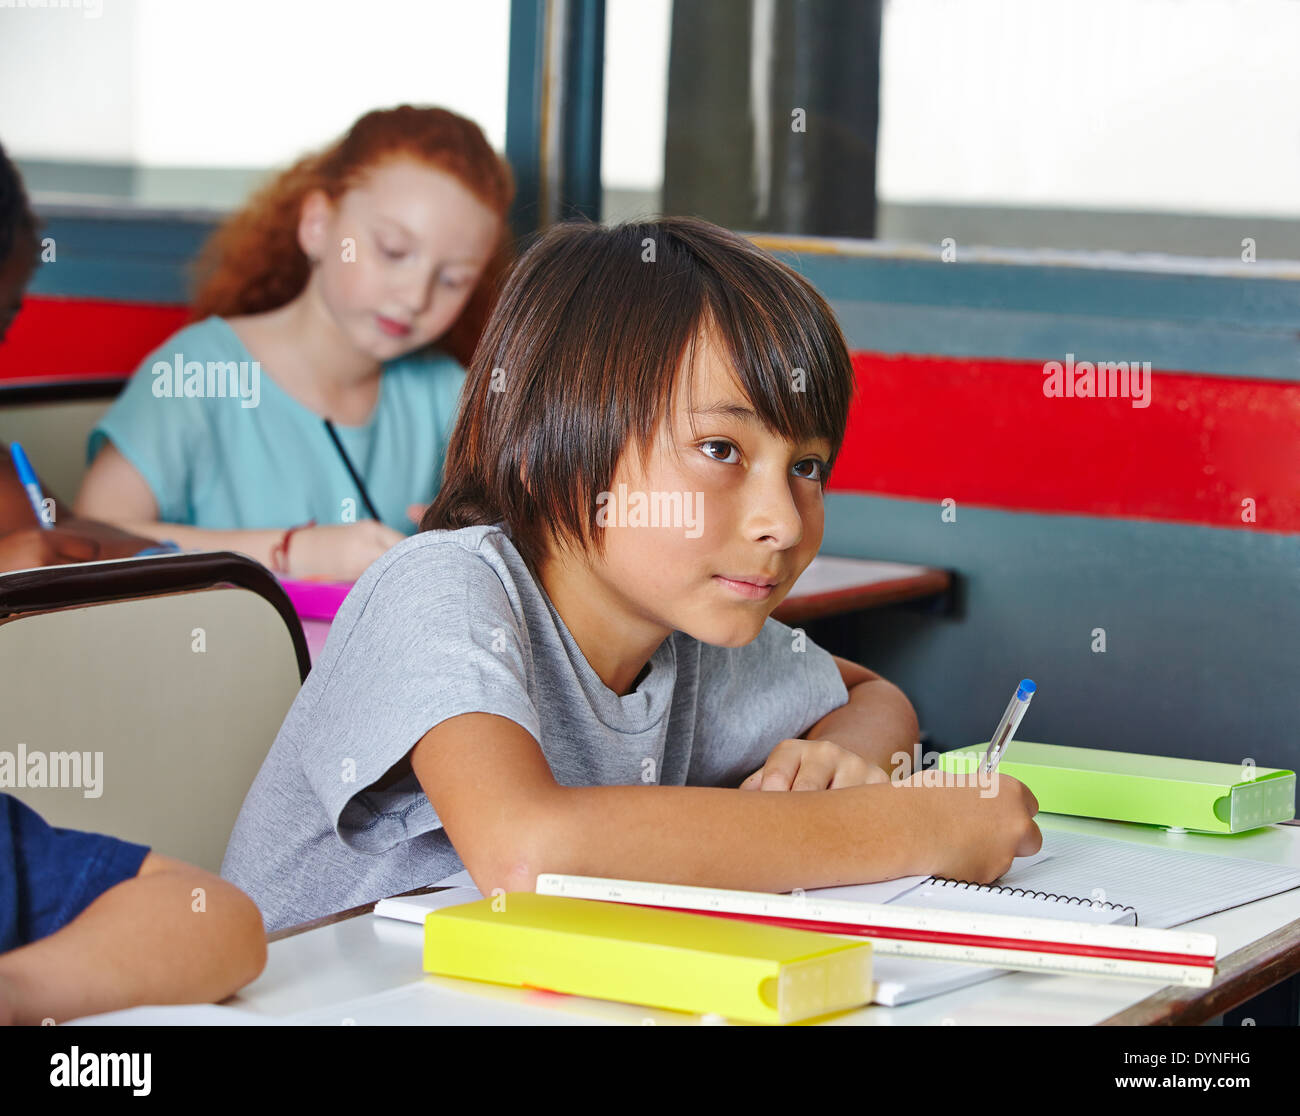 Some students writing a pop quiz in elementary school class Stock Photo